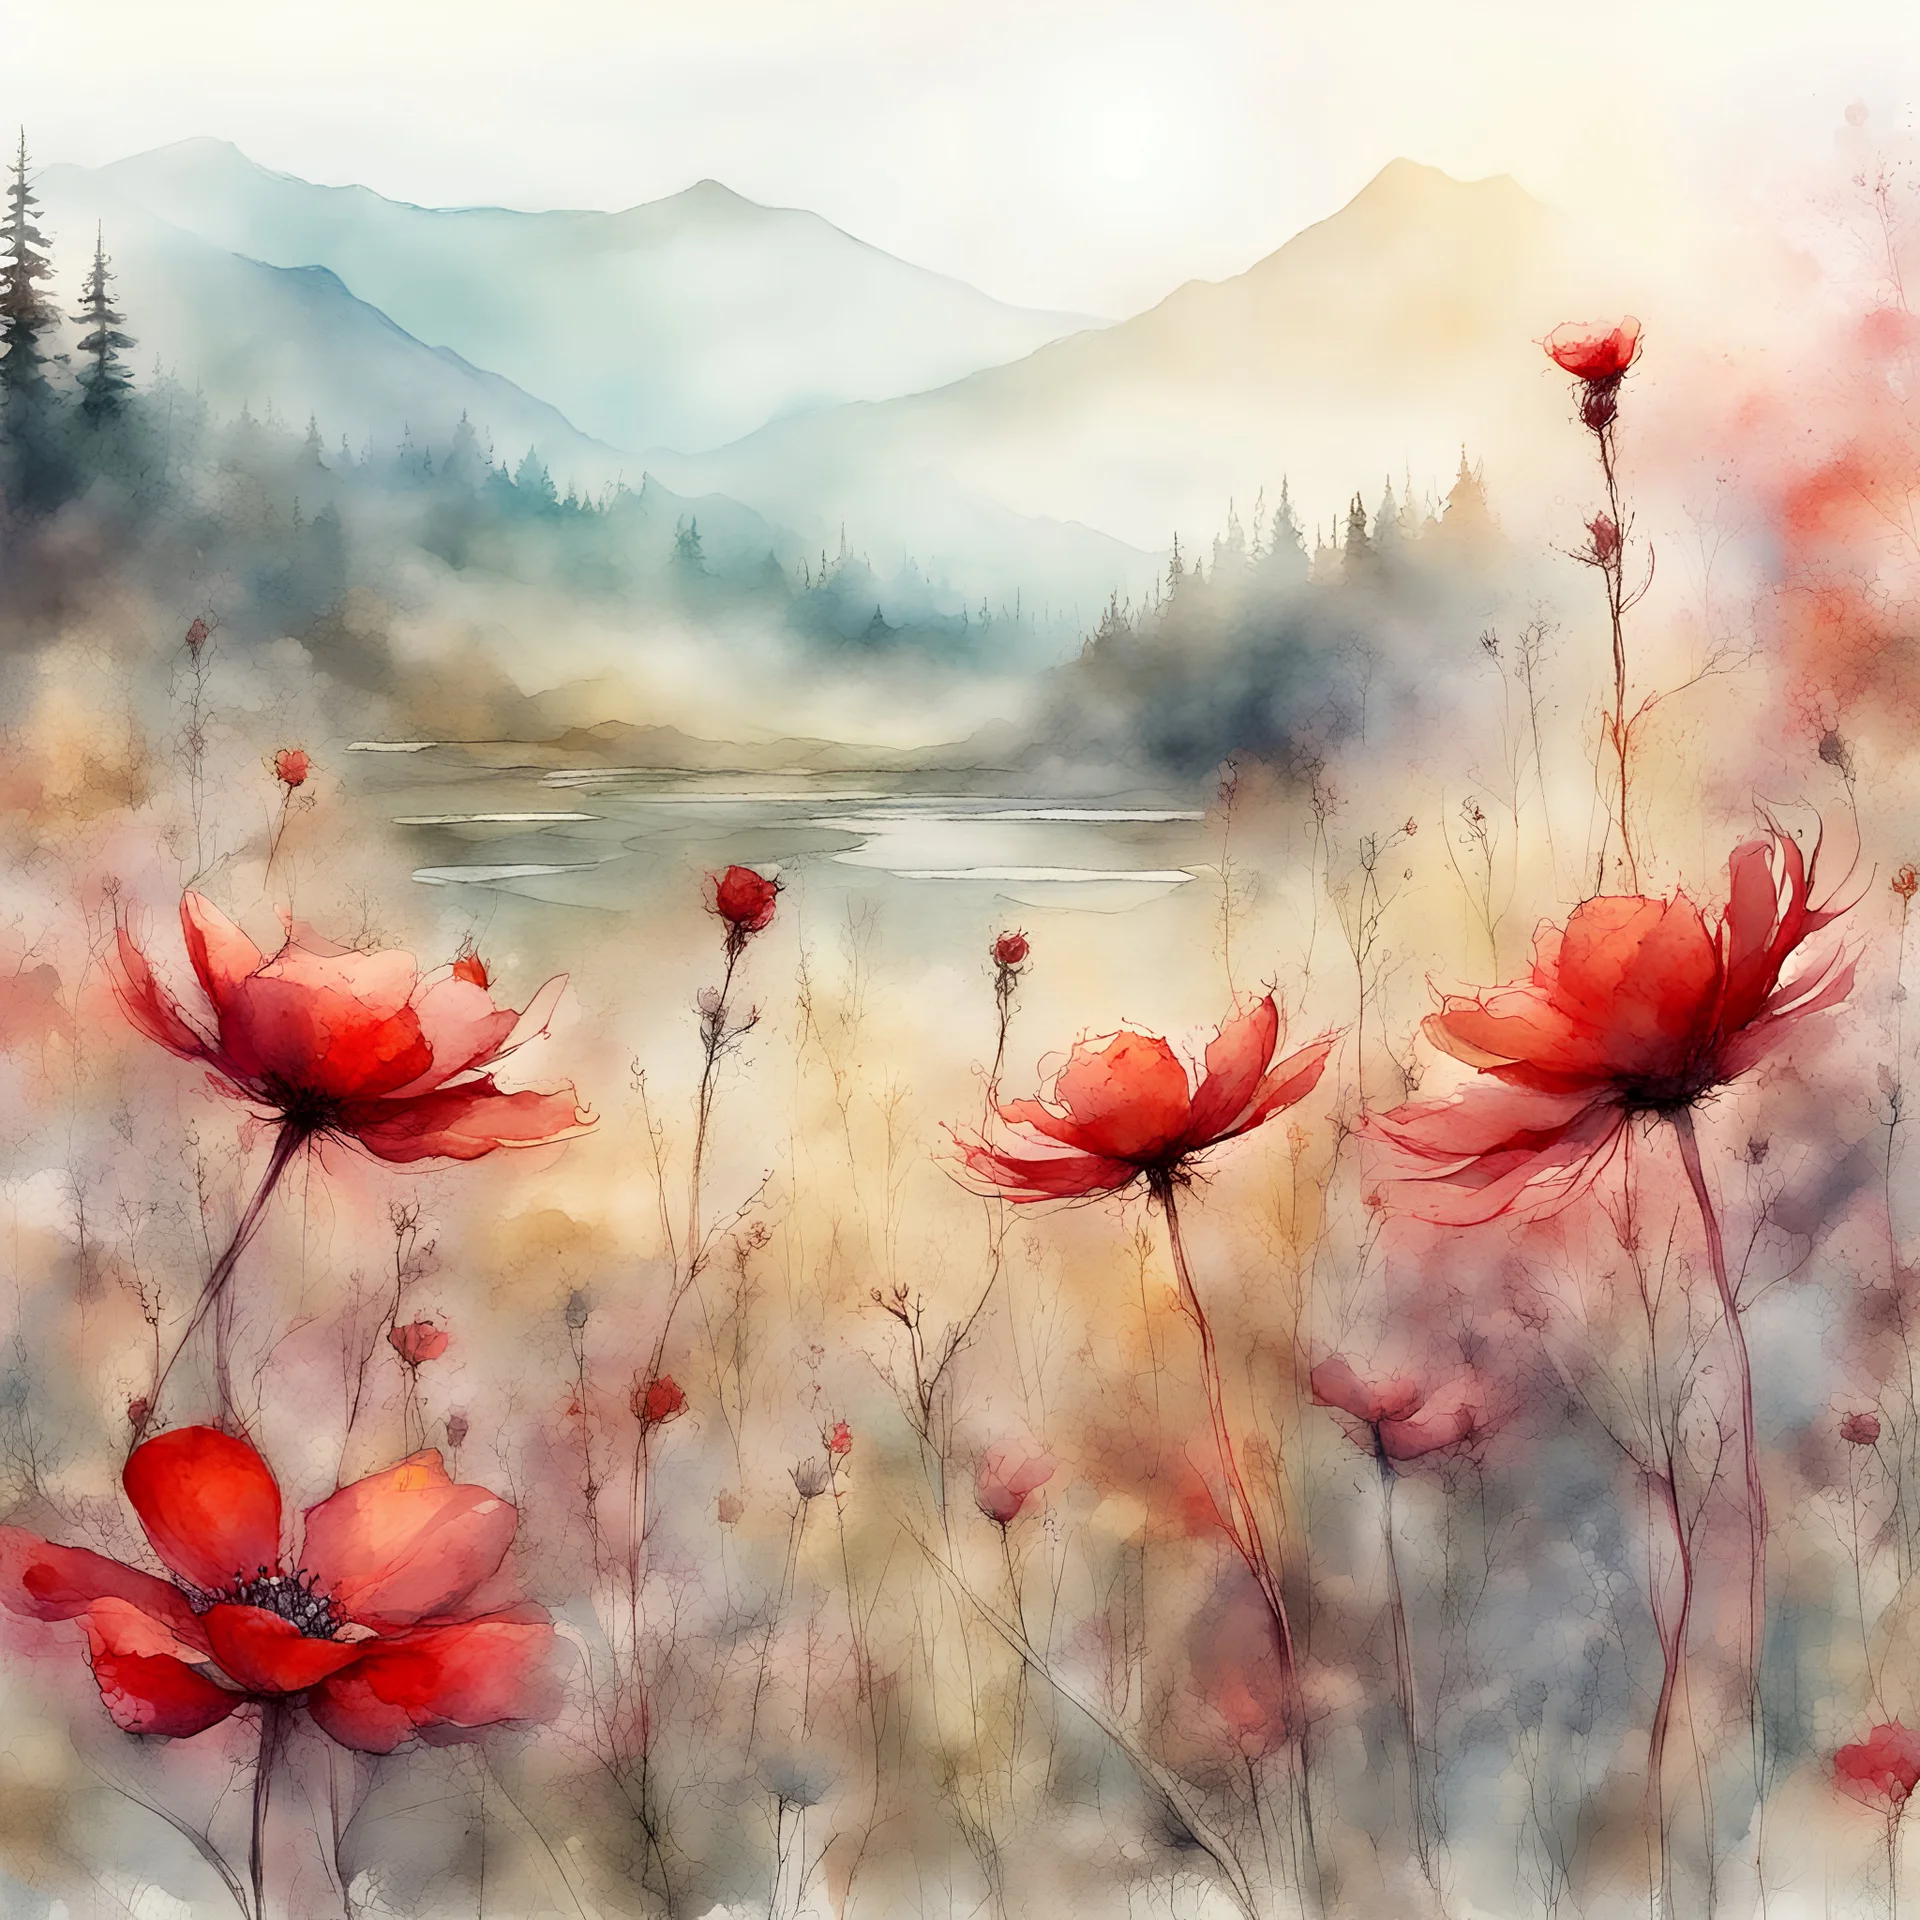 Digital colorful red watercolor Illustration of a beautiful Vibrant red flower meadow fantasy red landscape, mountain river wildflowers butterflies in the morning light, by JB, Waterhouse :: Carne Griffiths, Minjae Lee, Ana Paula Hoppe, :: :: Stylized Splash watercolor art :: Intricate :: Complex contrast :: HDR :: Sharp :: soft :: Cinematic Volumetric lighting :: flowery pastel colours :: wide long shot